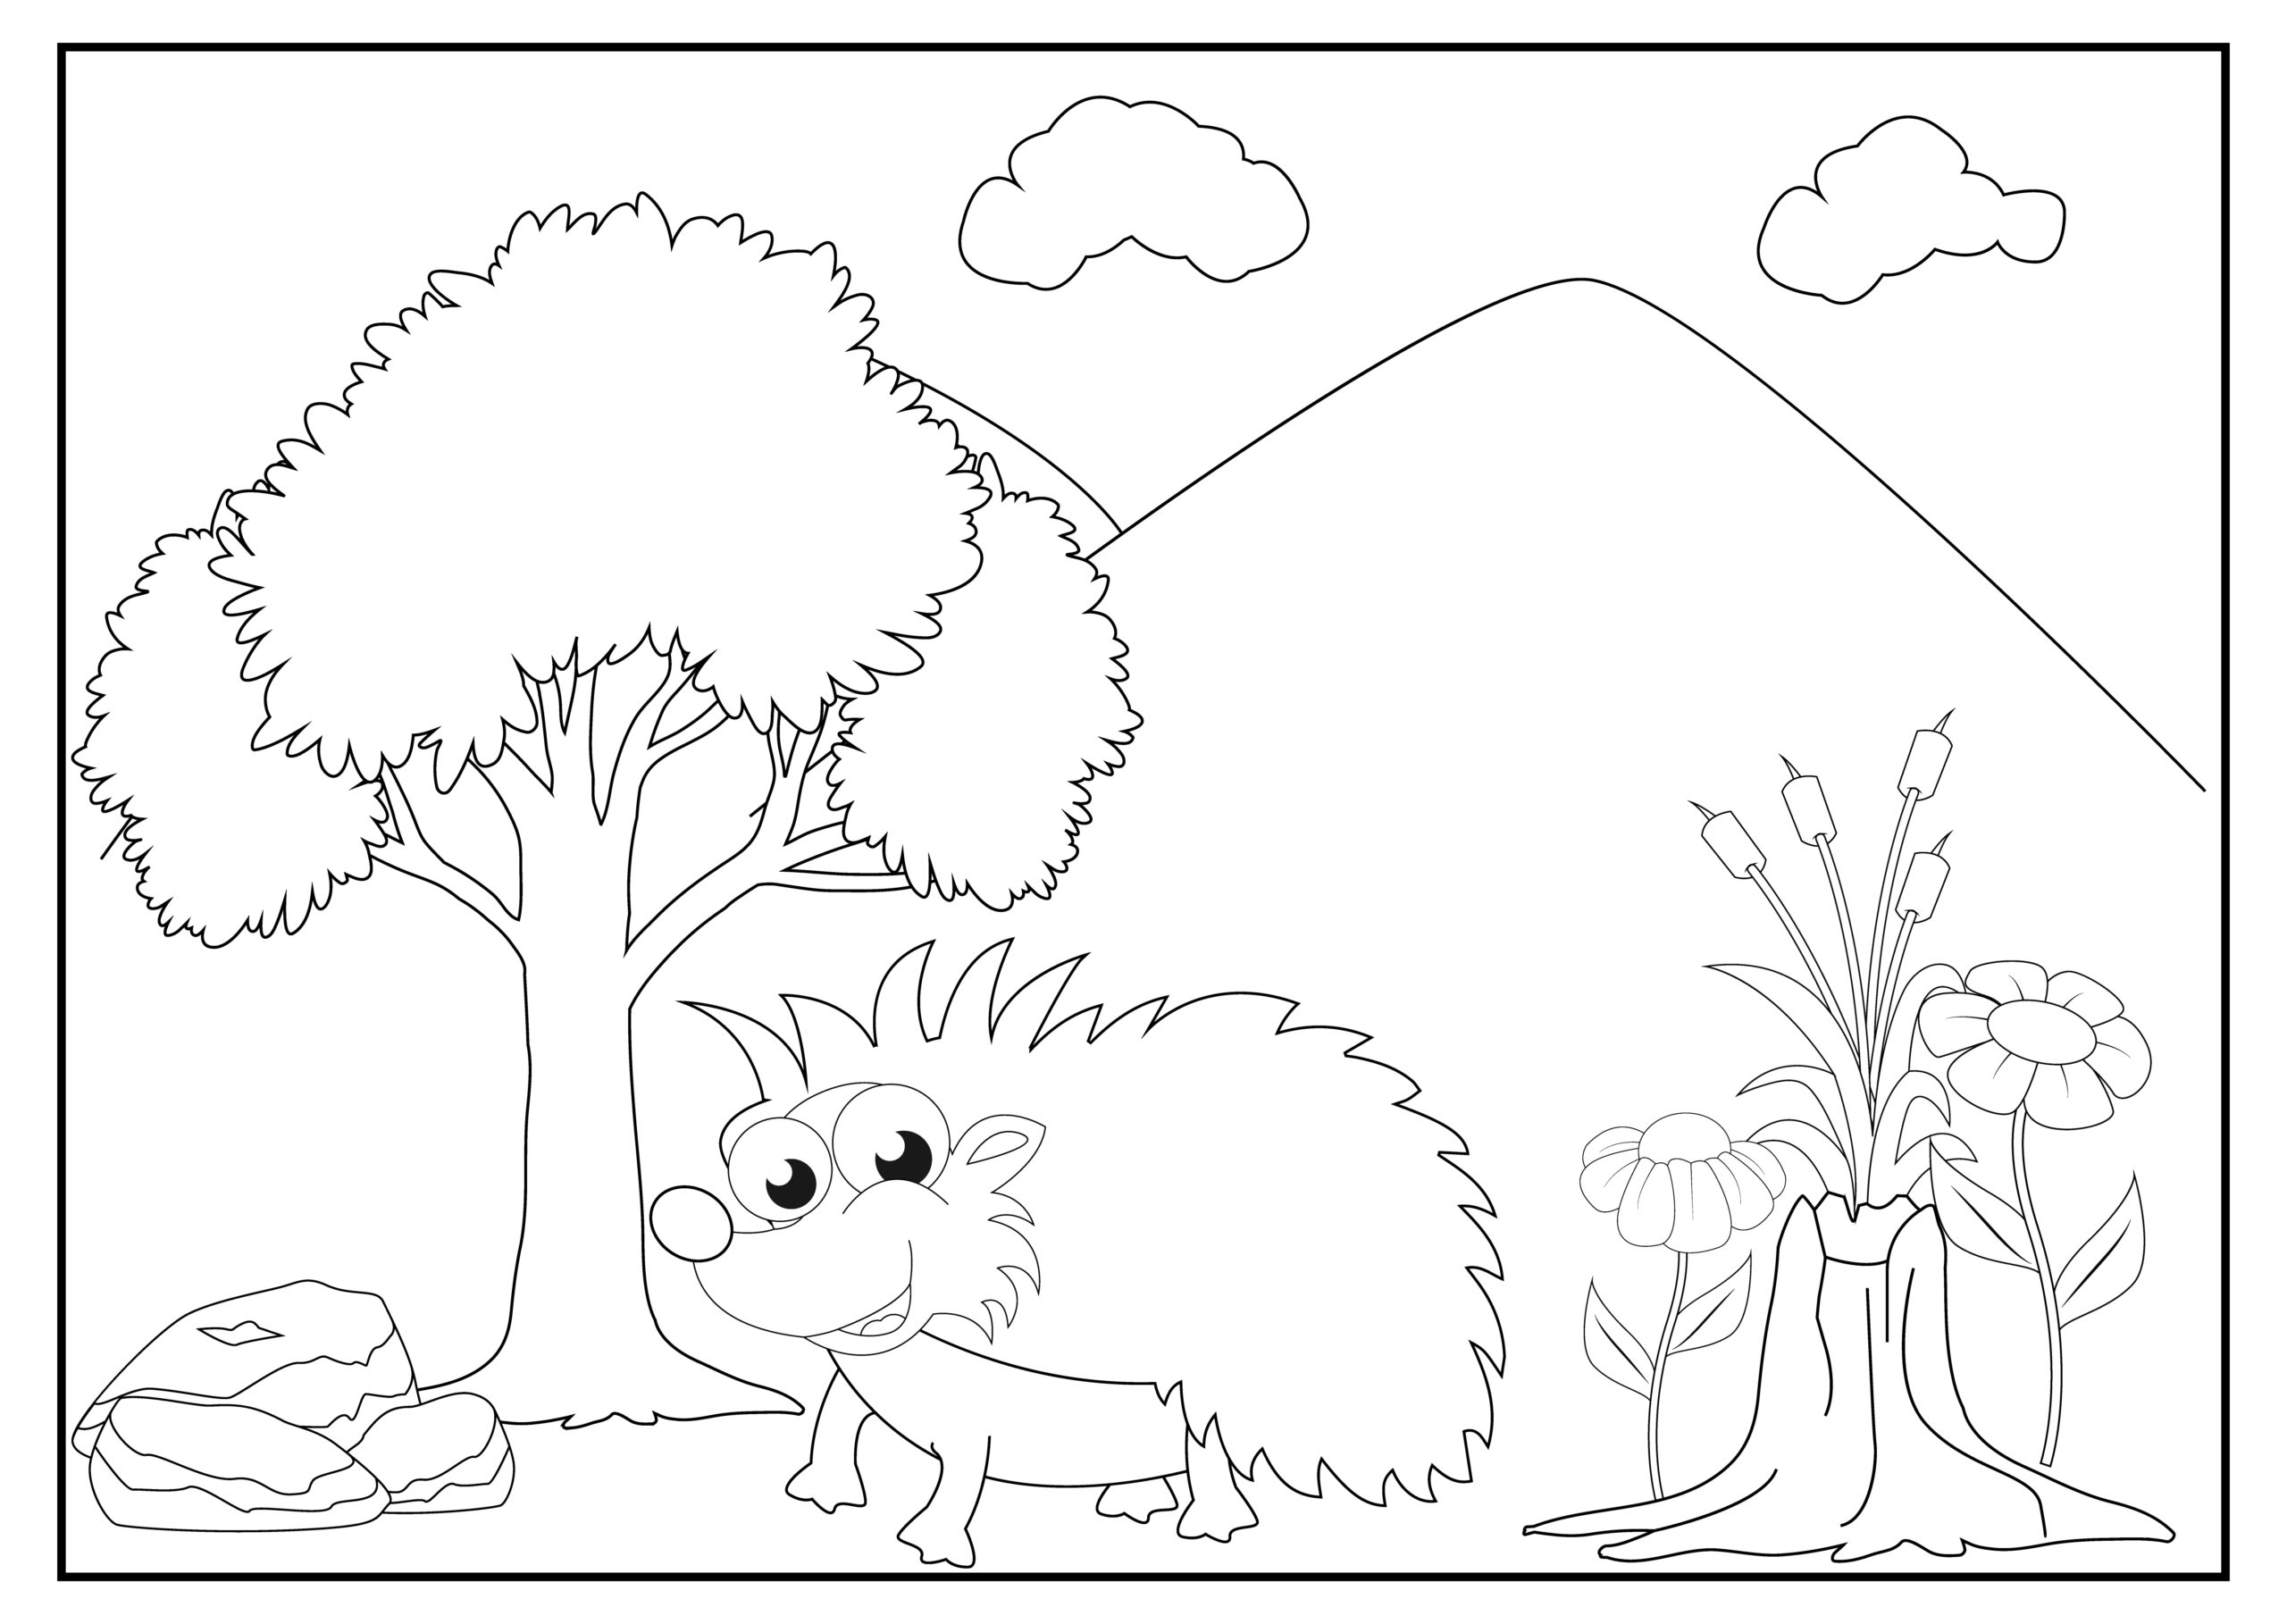 Coloring pages for kids with cute porcupine